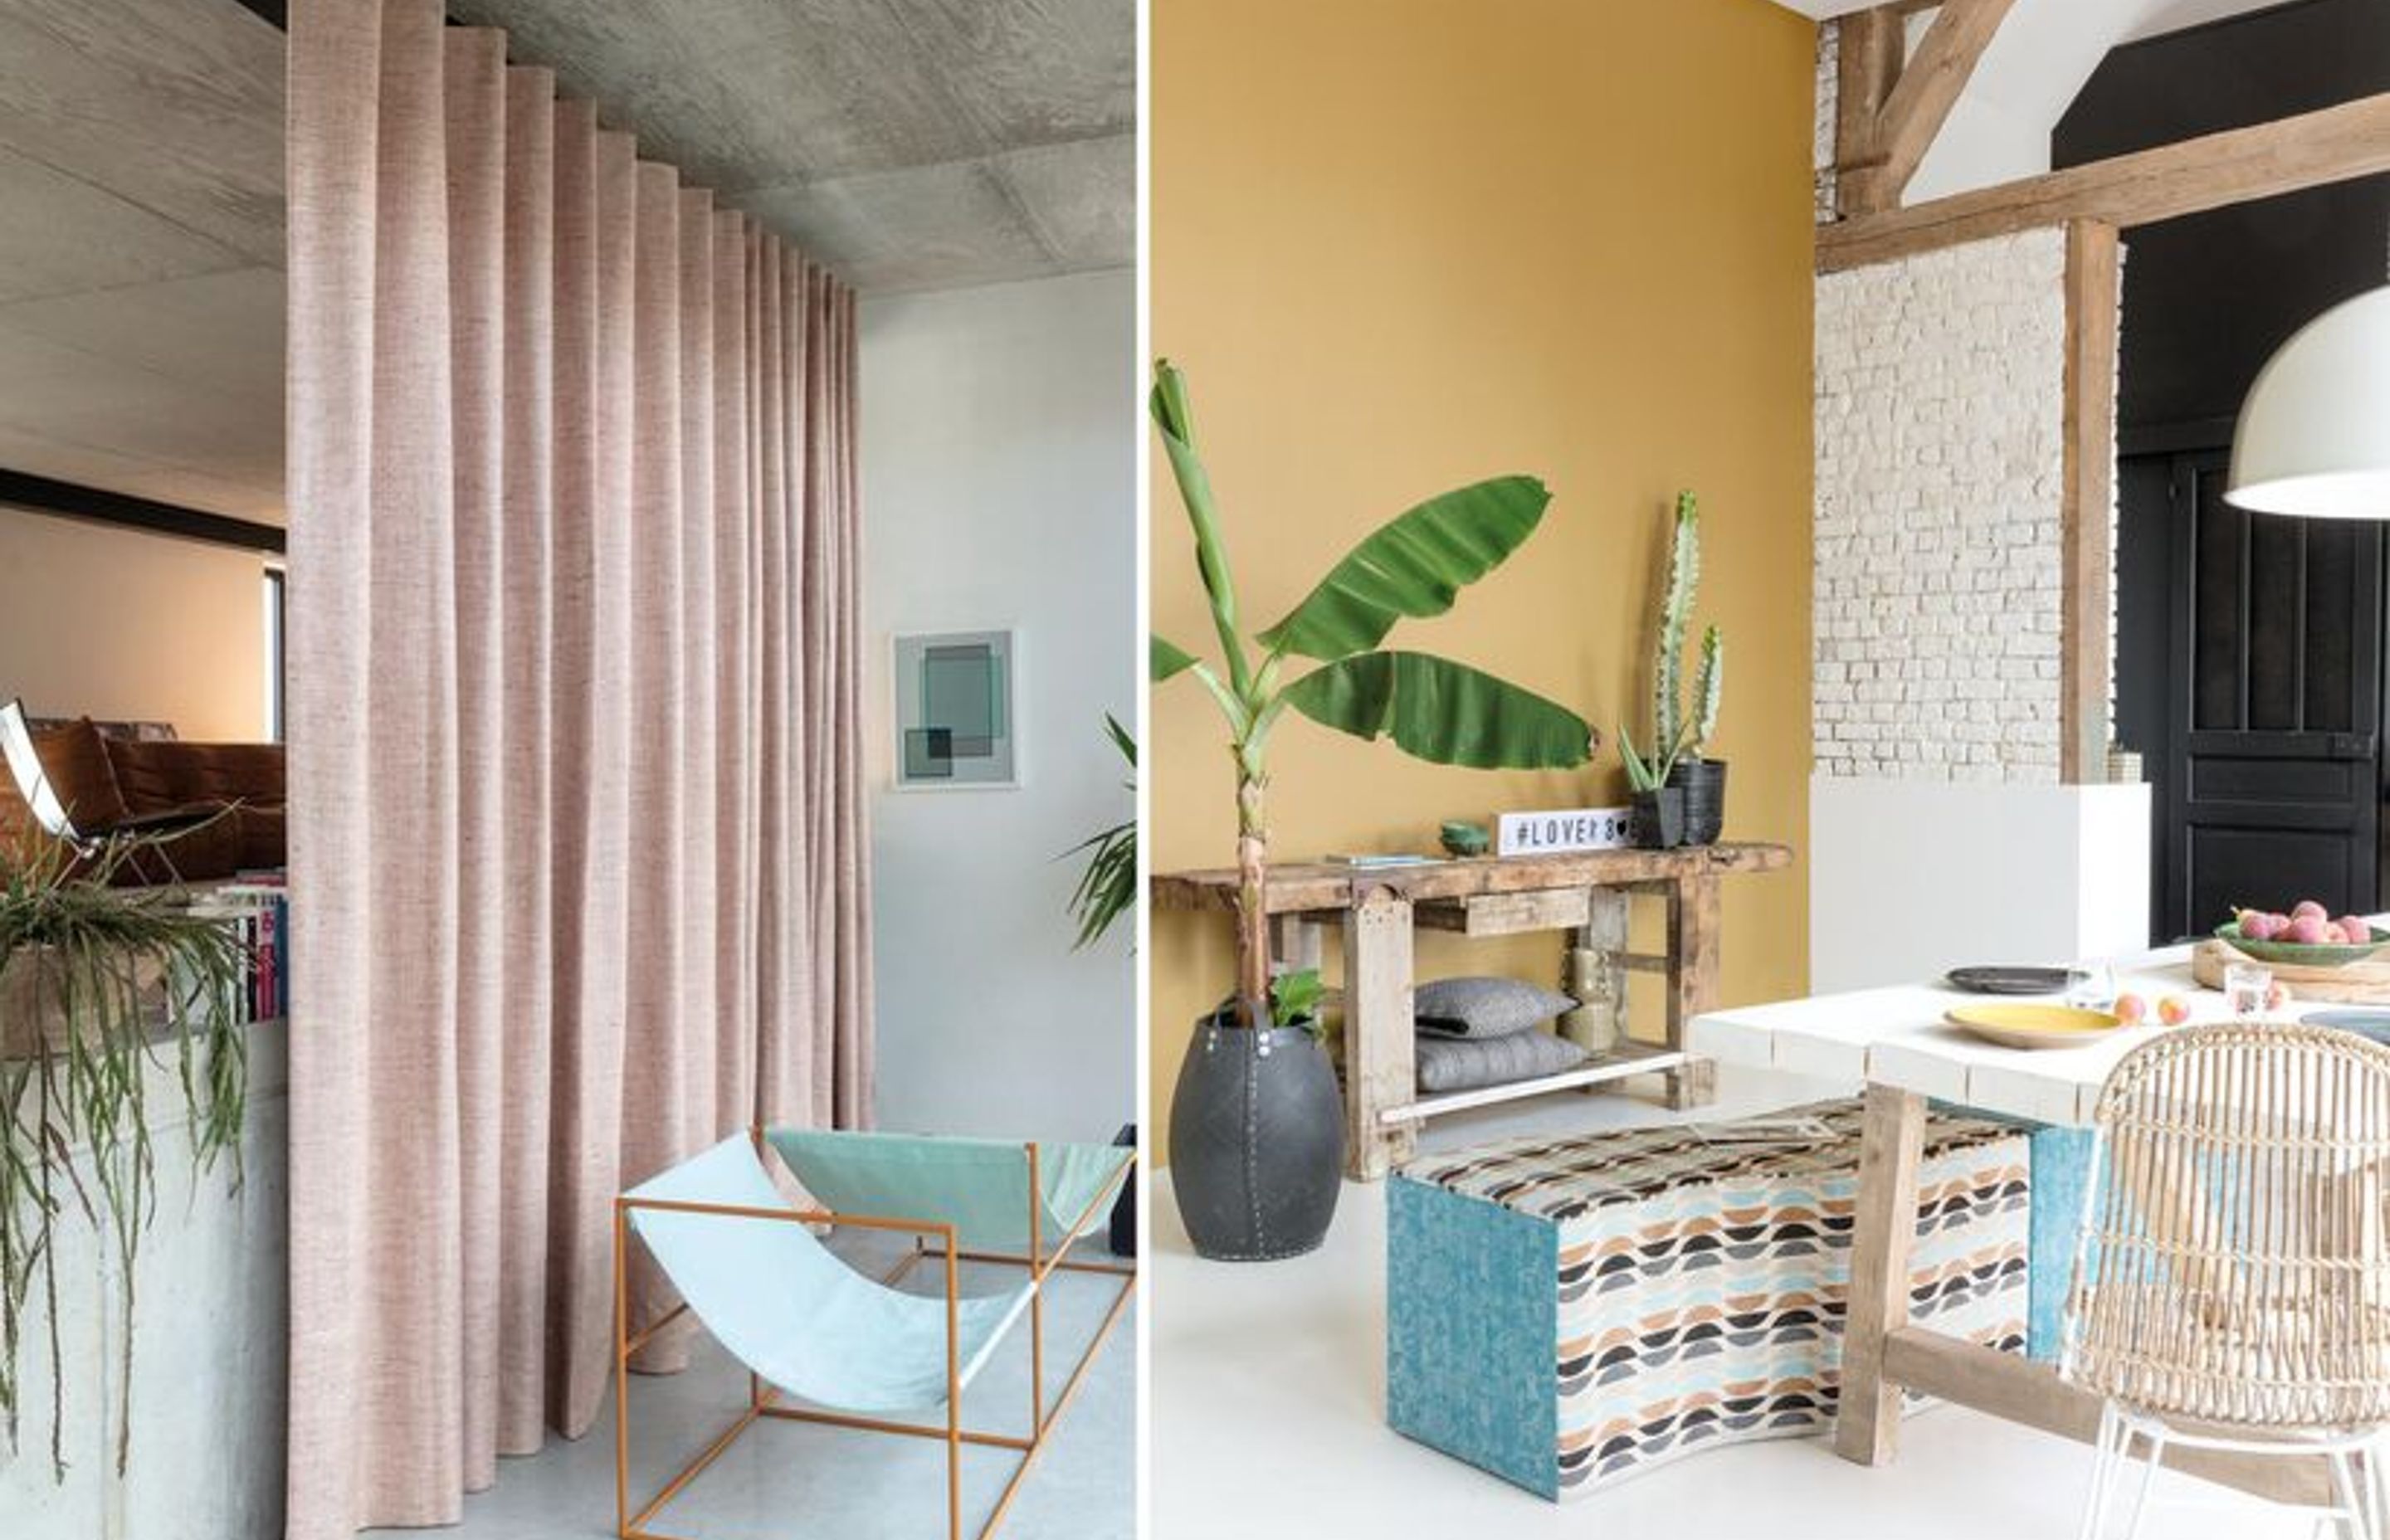 CREATE AN AIRY AND SOFT MOOD WITH PASTEL DRAPERY, PATTERNED FABRICS AND WALL PAINT. DRAPERY: BAVARIA, ZEPEL / UPHOLSTERED BENCHES: OCEAN DRIVE, (FIBREGUARD)